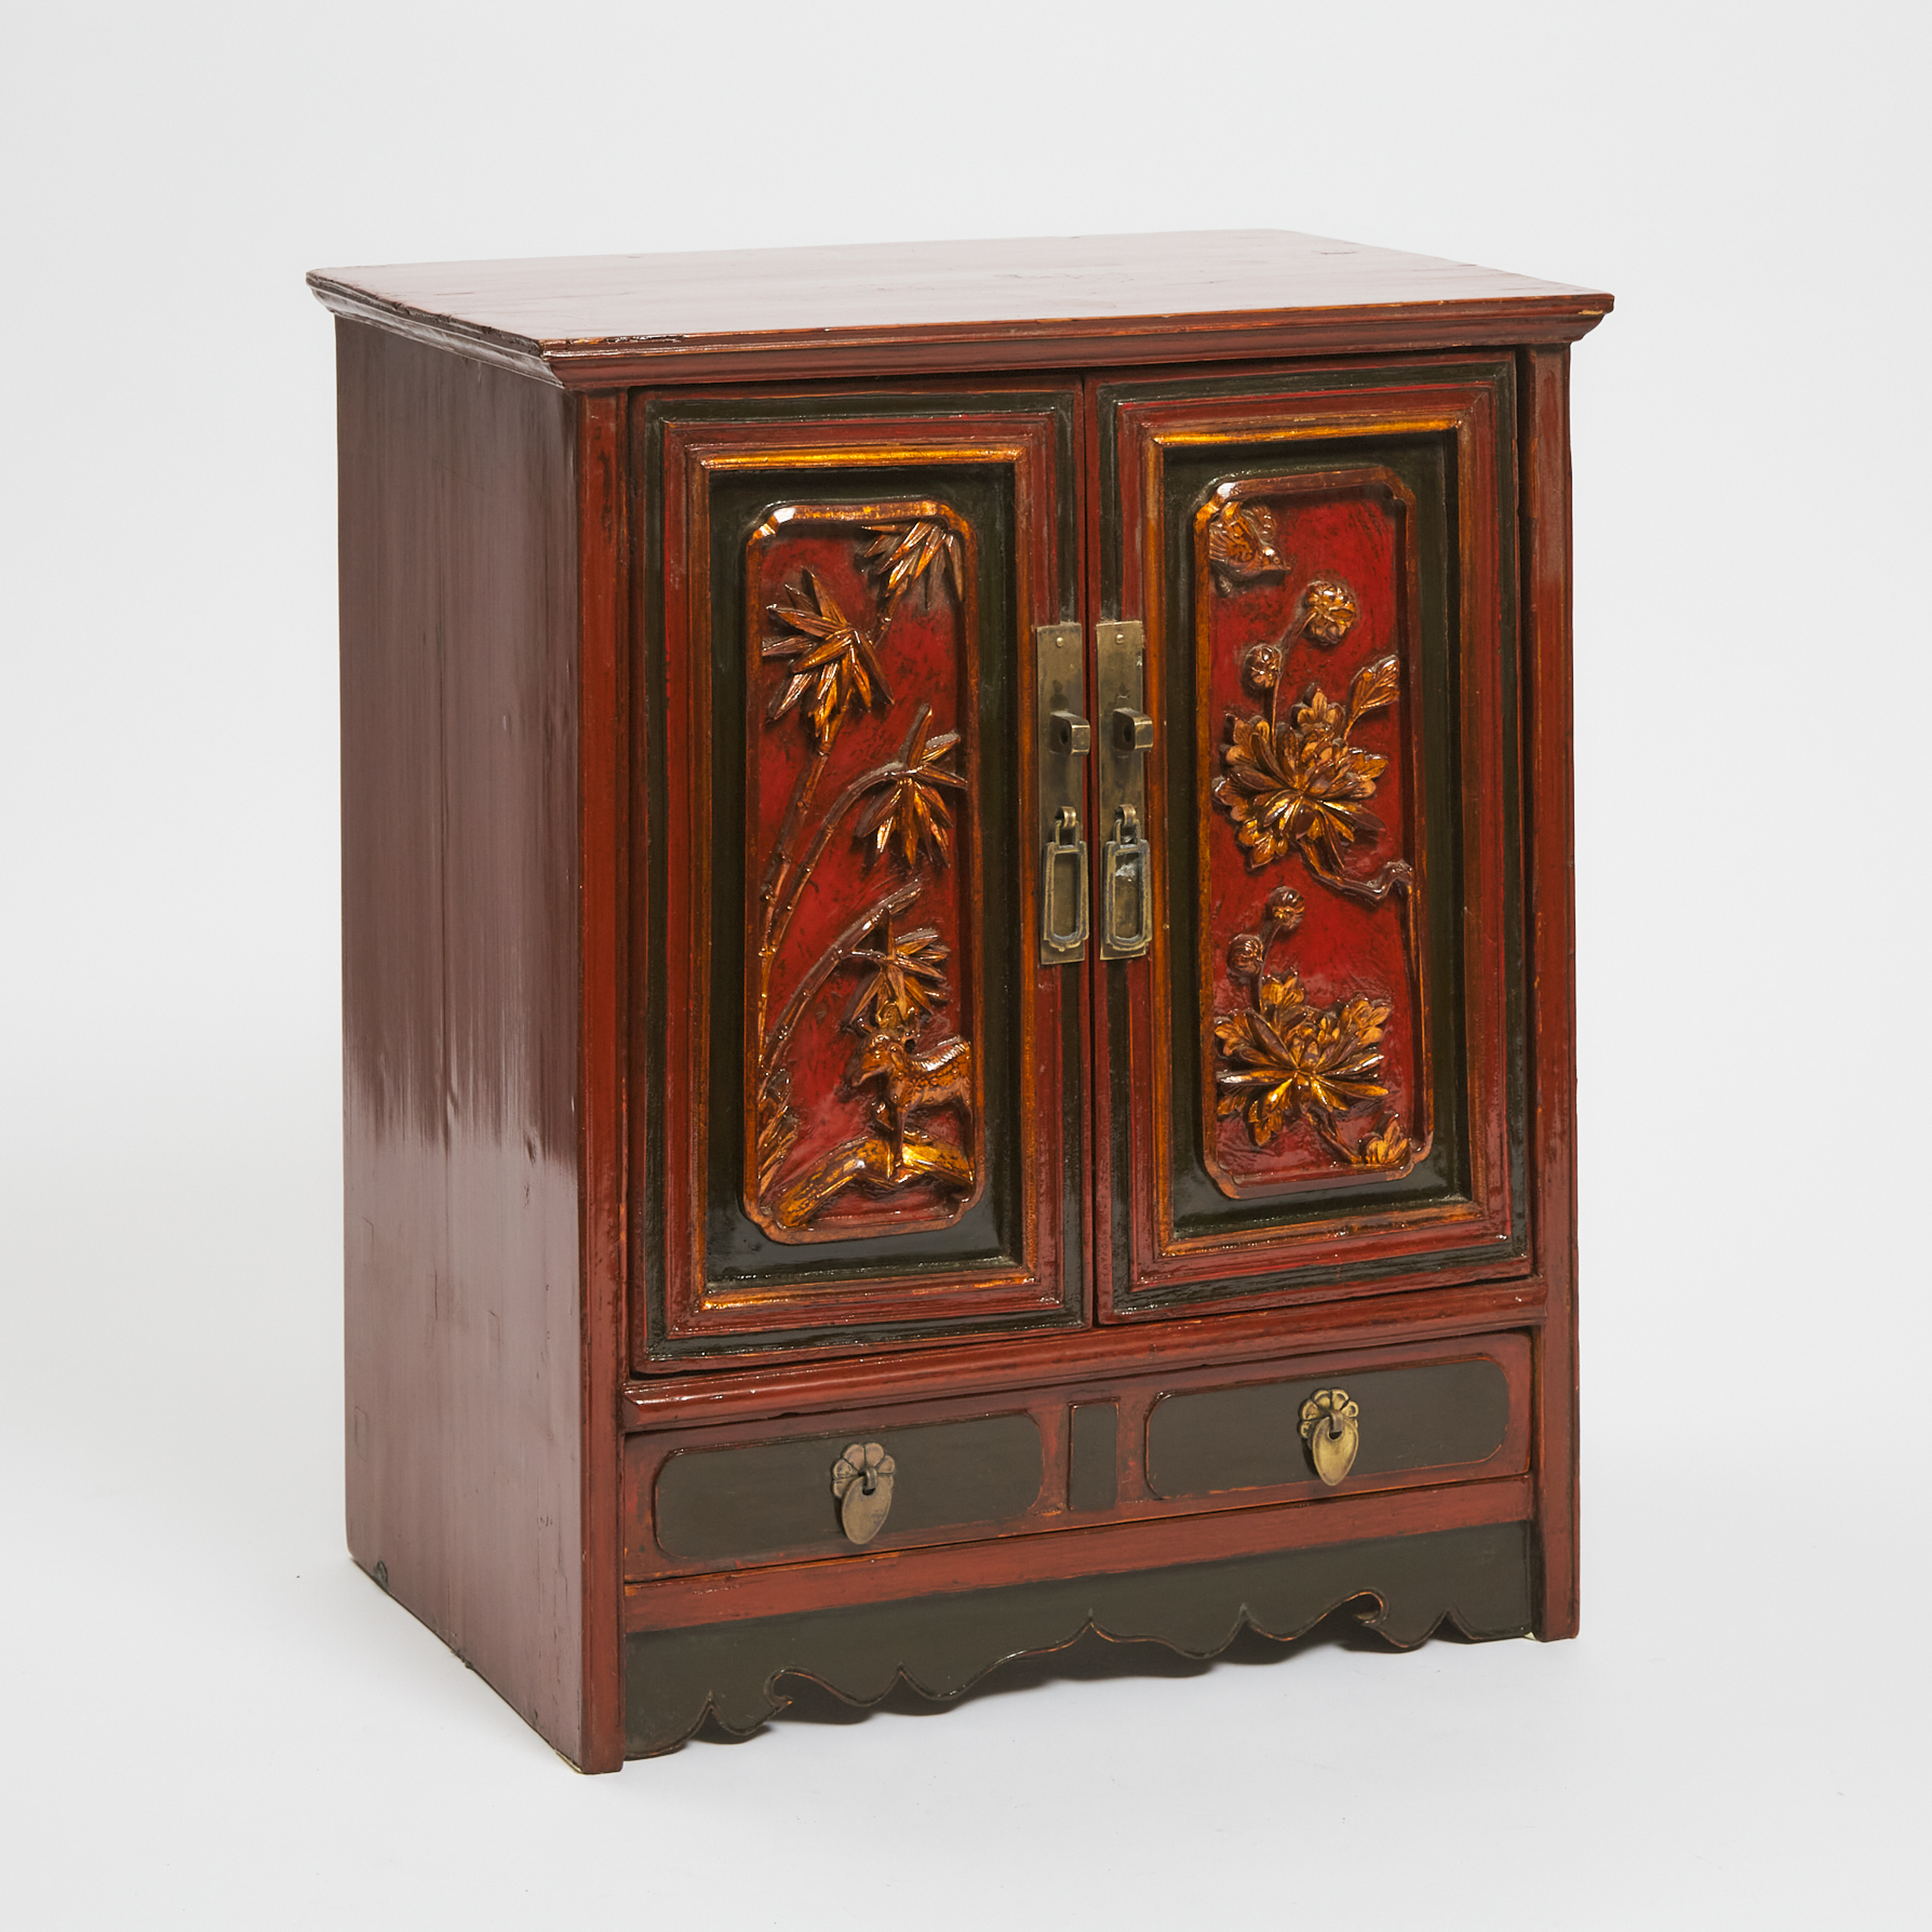 A Small Chinese Red Lacquered Cabinet  3ab969